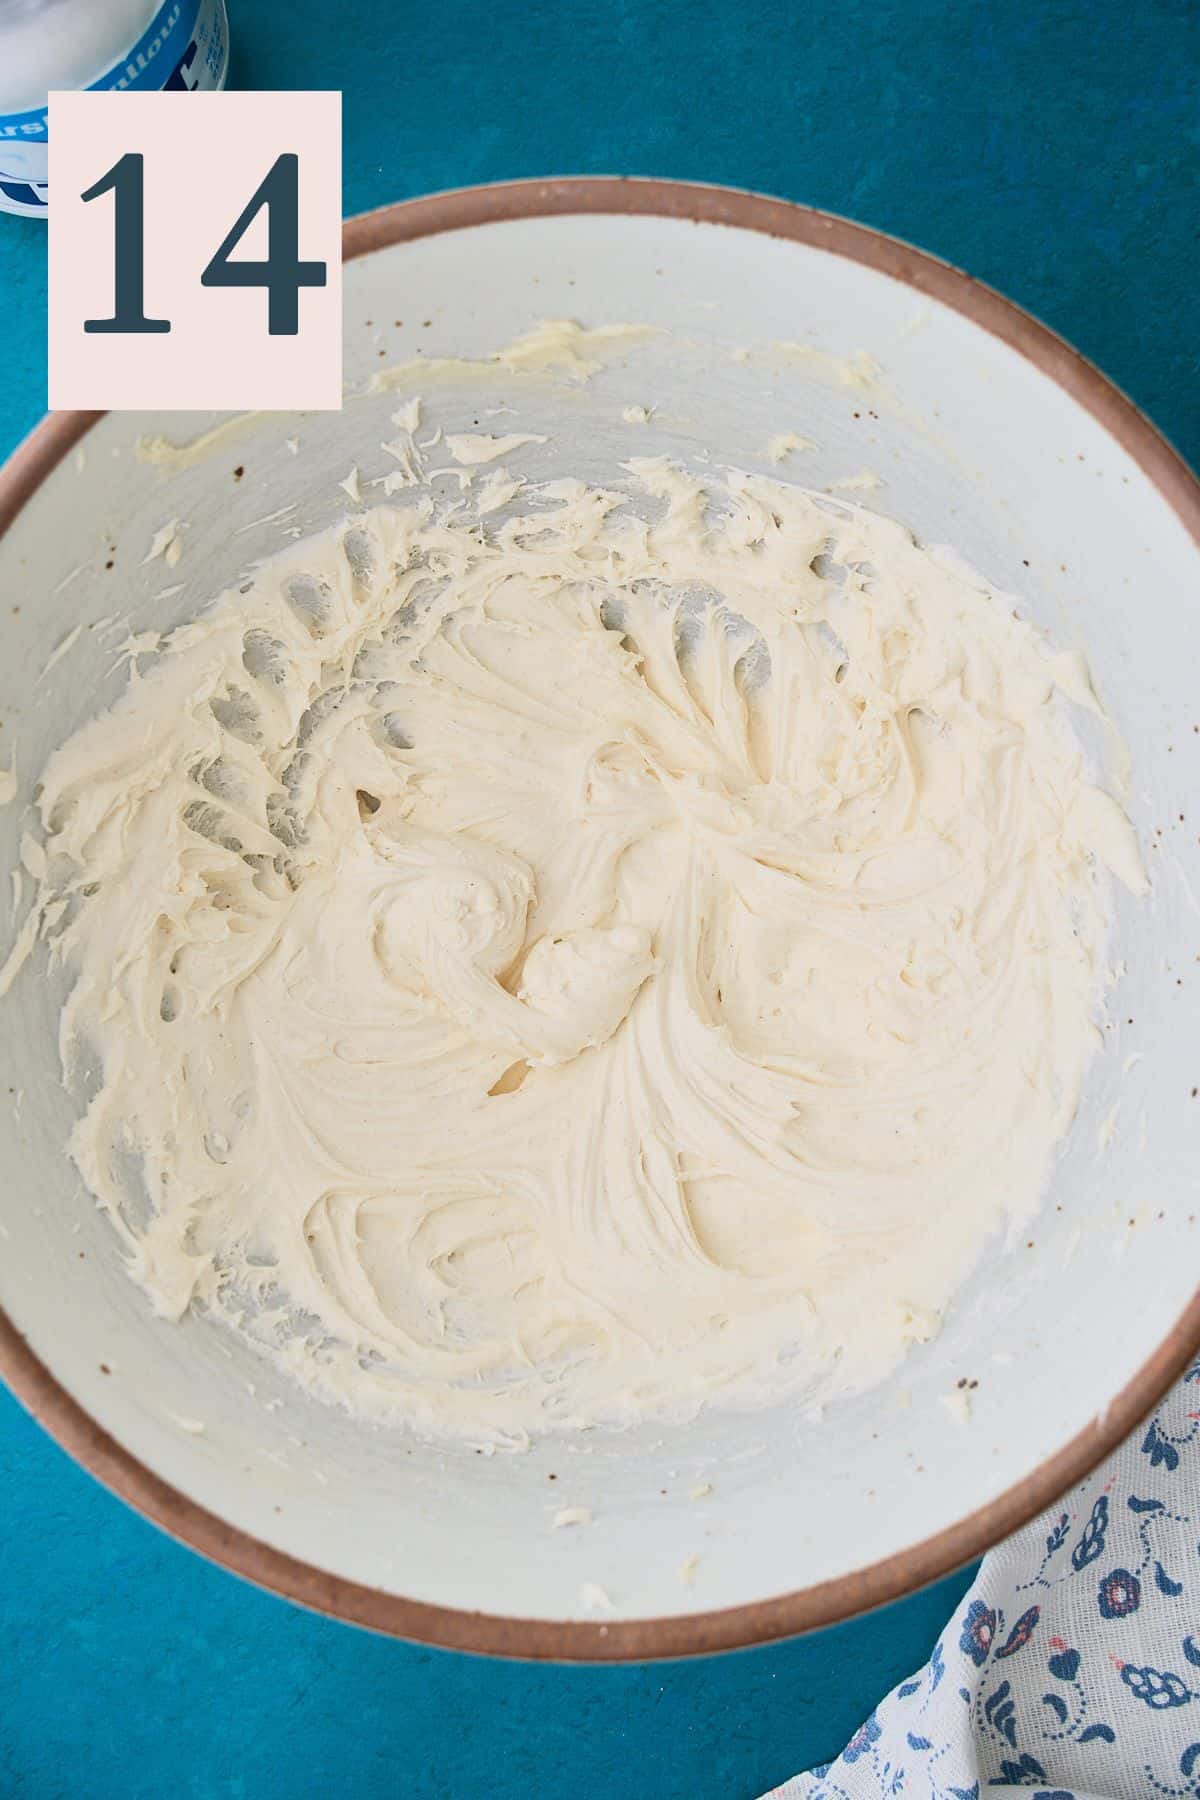 Marshmallow fluff frosting in a mixing bowl.